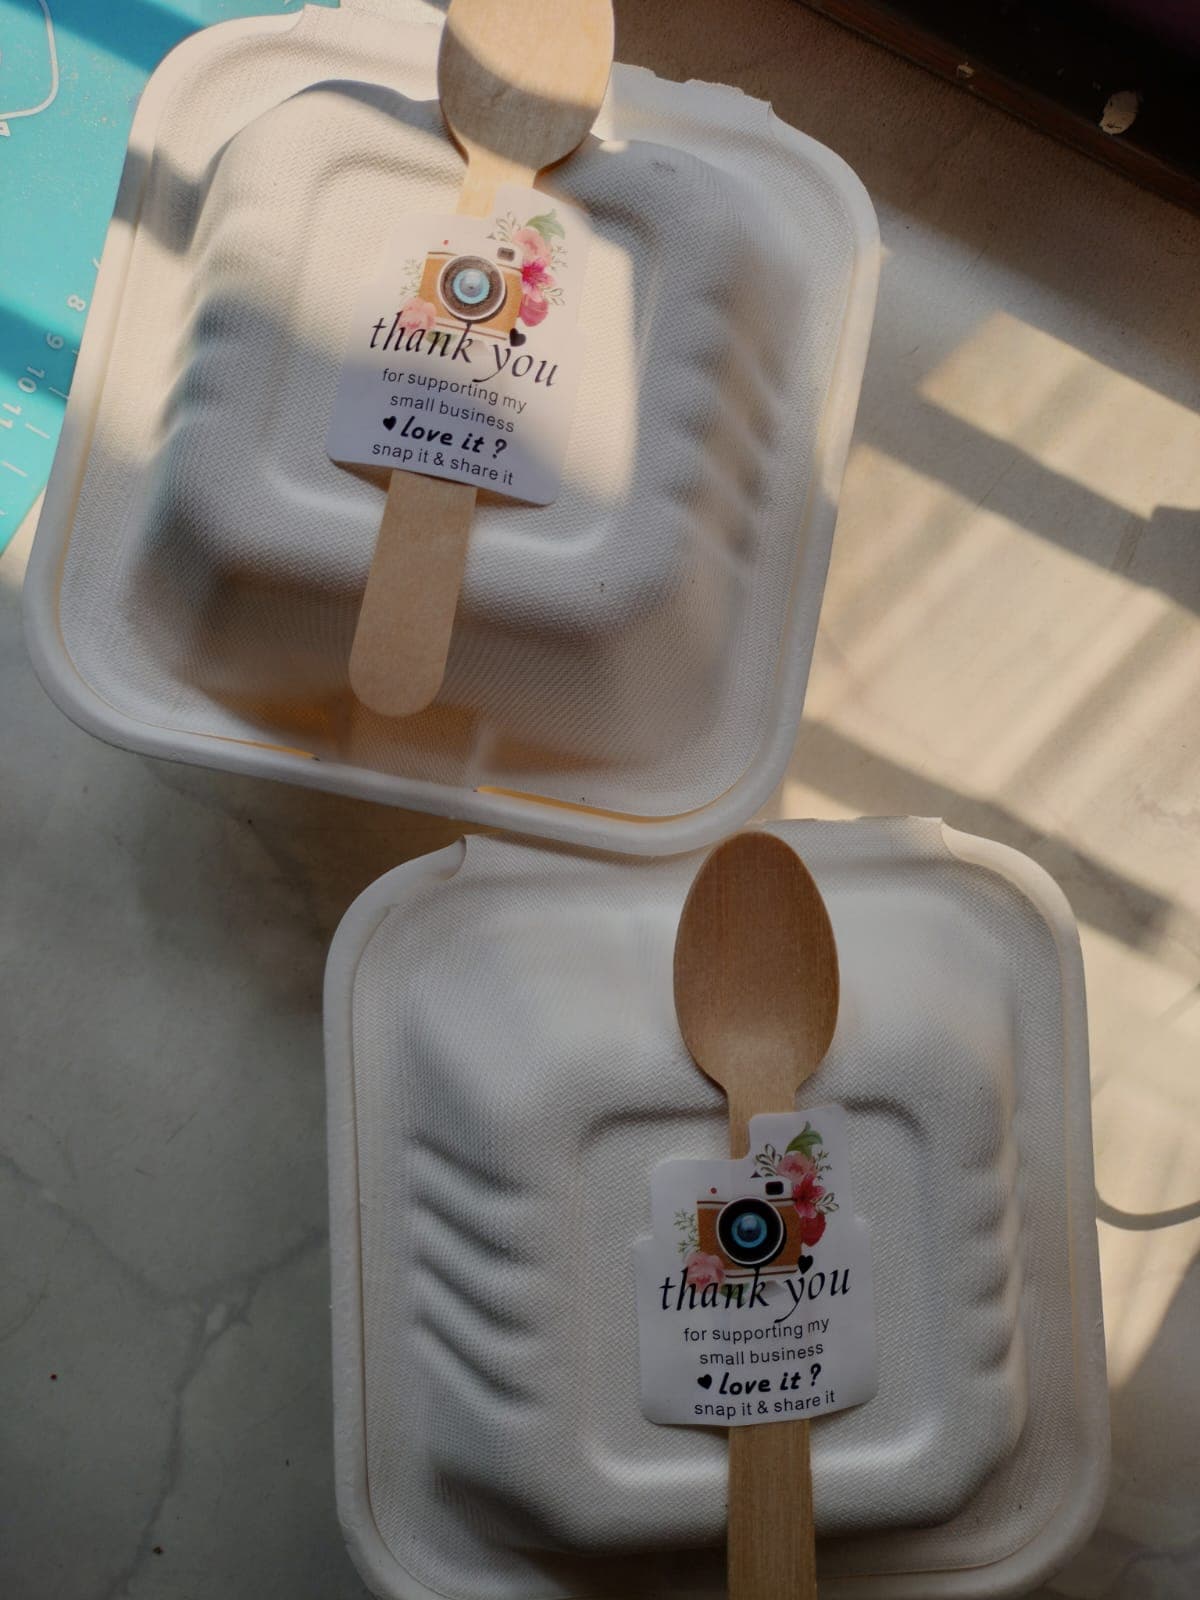 Cake boxes with spoons